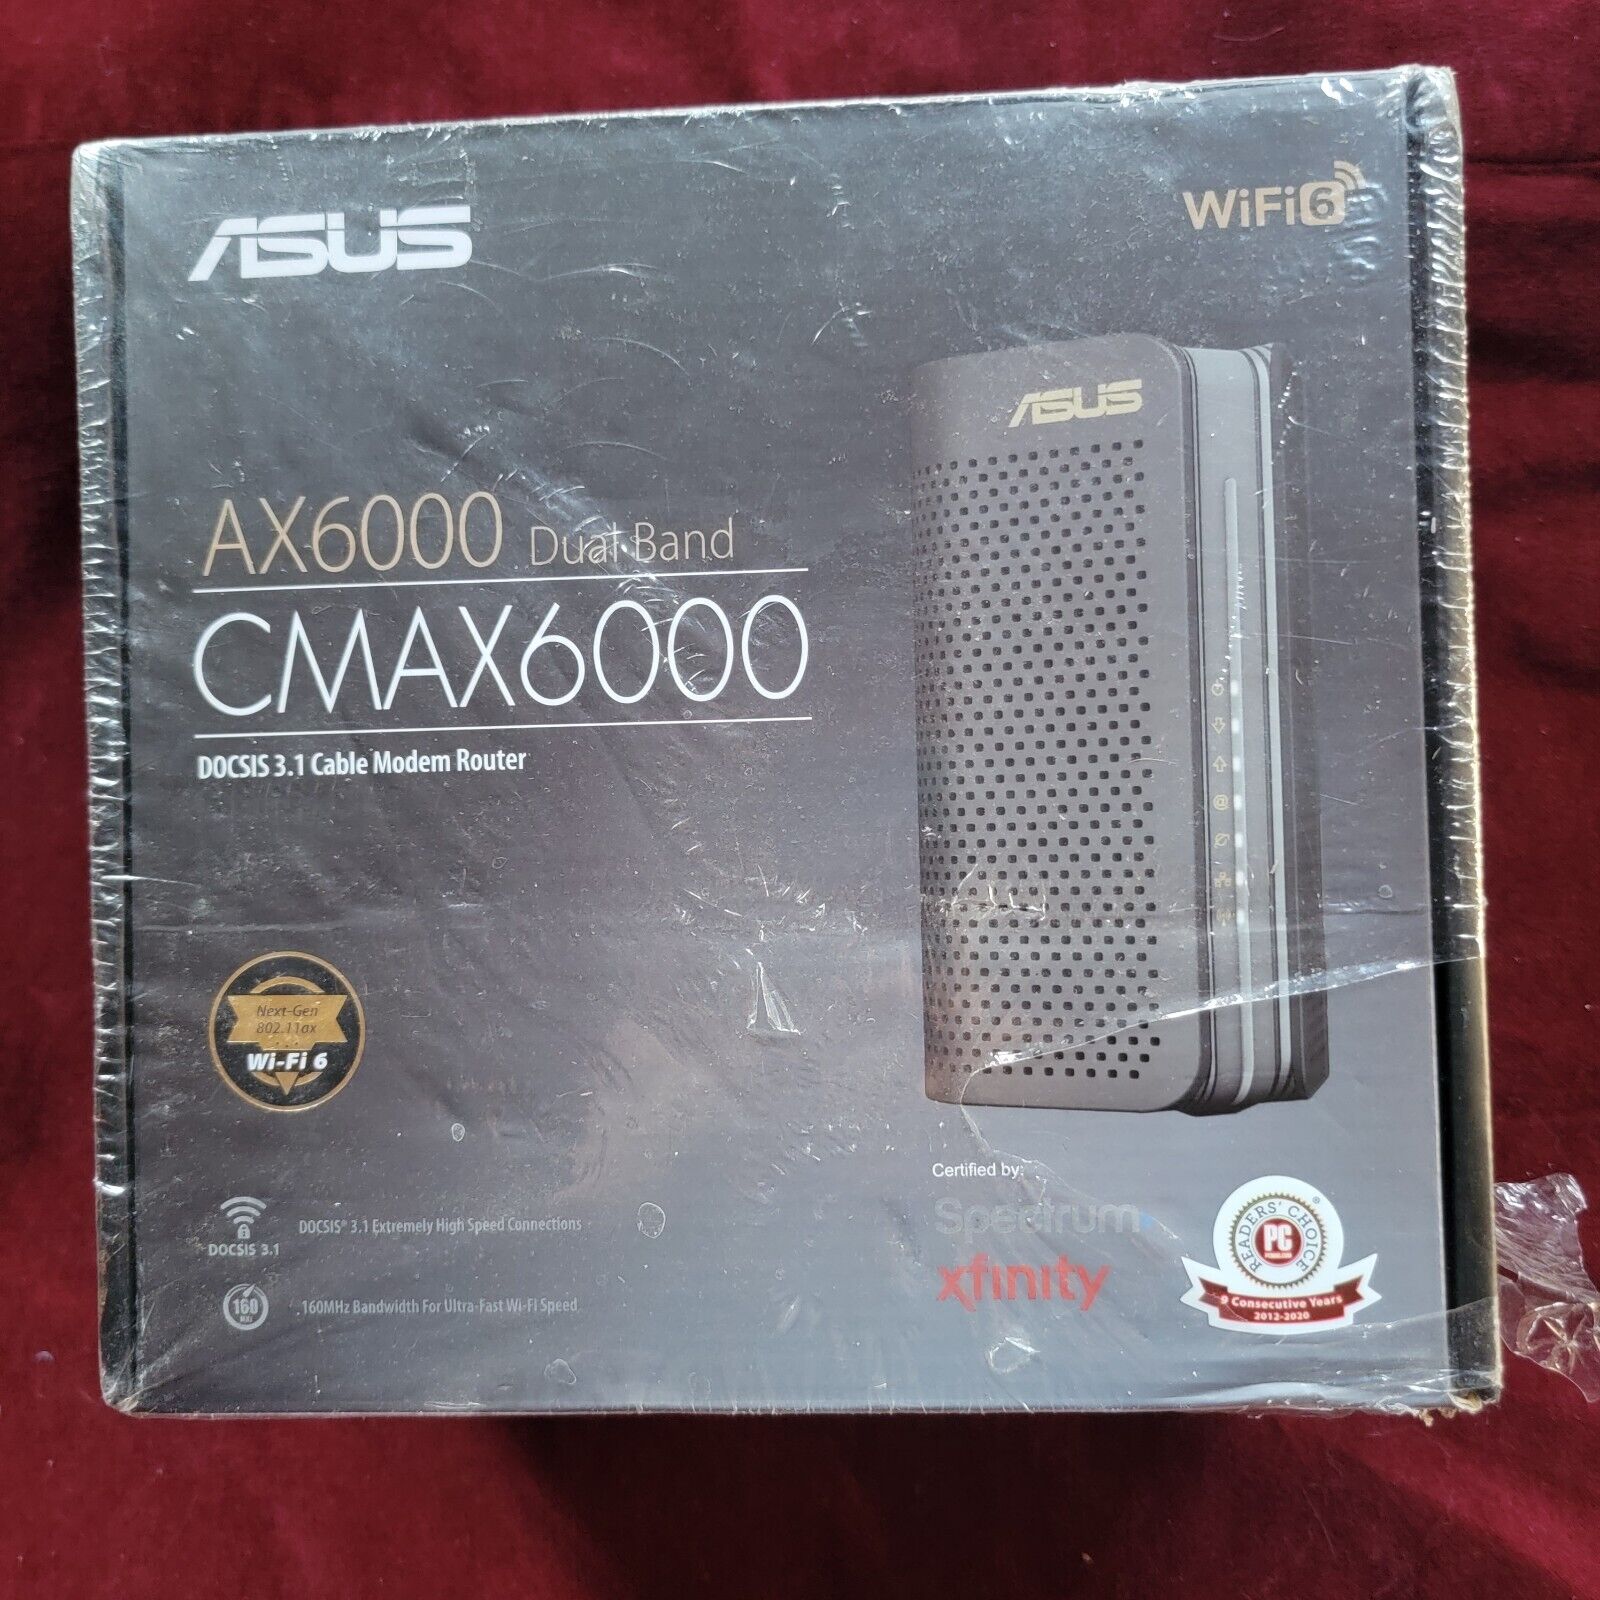 ASUS CMAX6000 Dual Band Cable Wireless Router